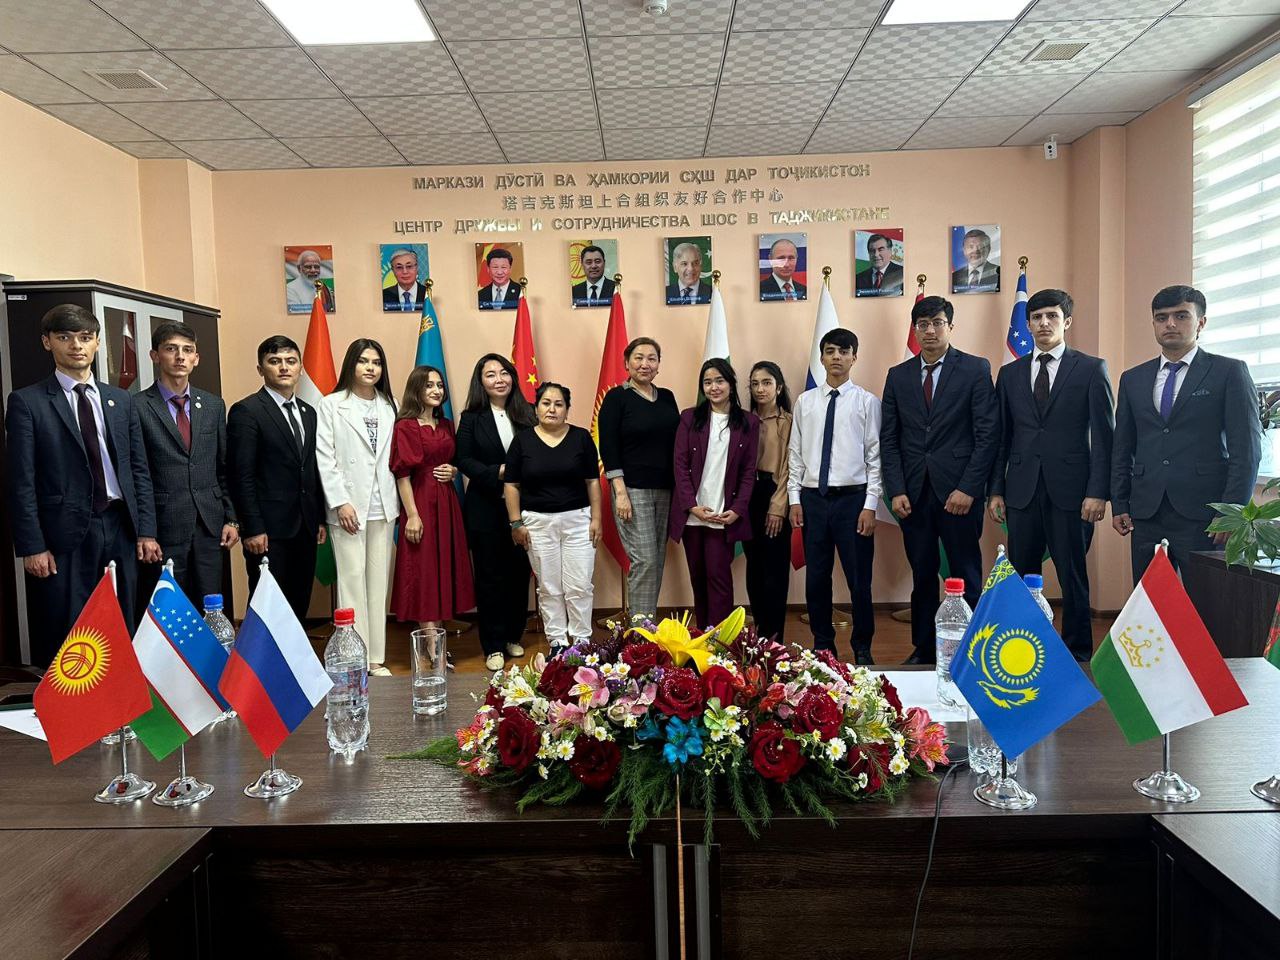 A case of successful cooperation between universities in Central Asia: the experience of Kazakhstan and Tajikistan